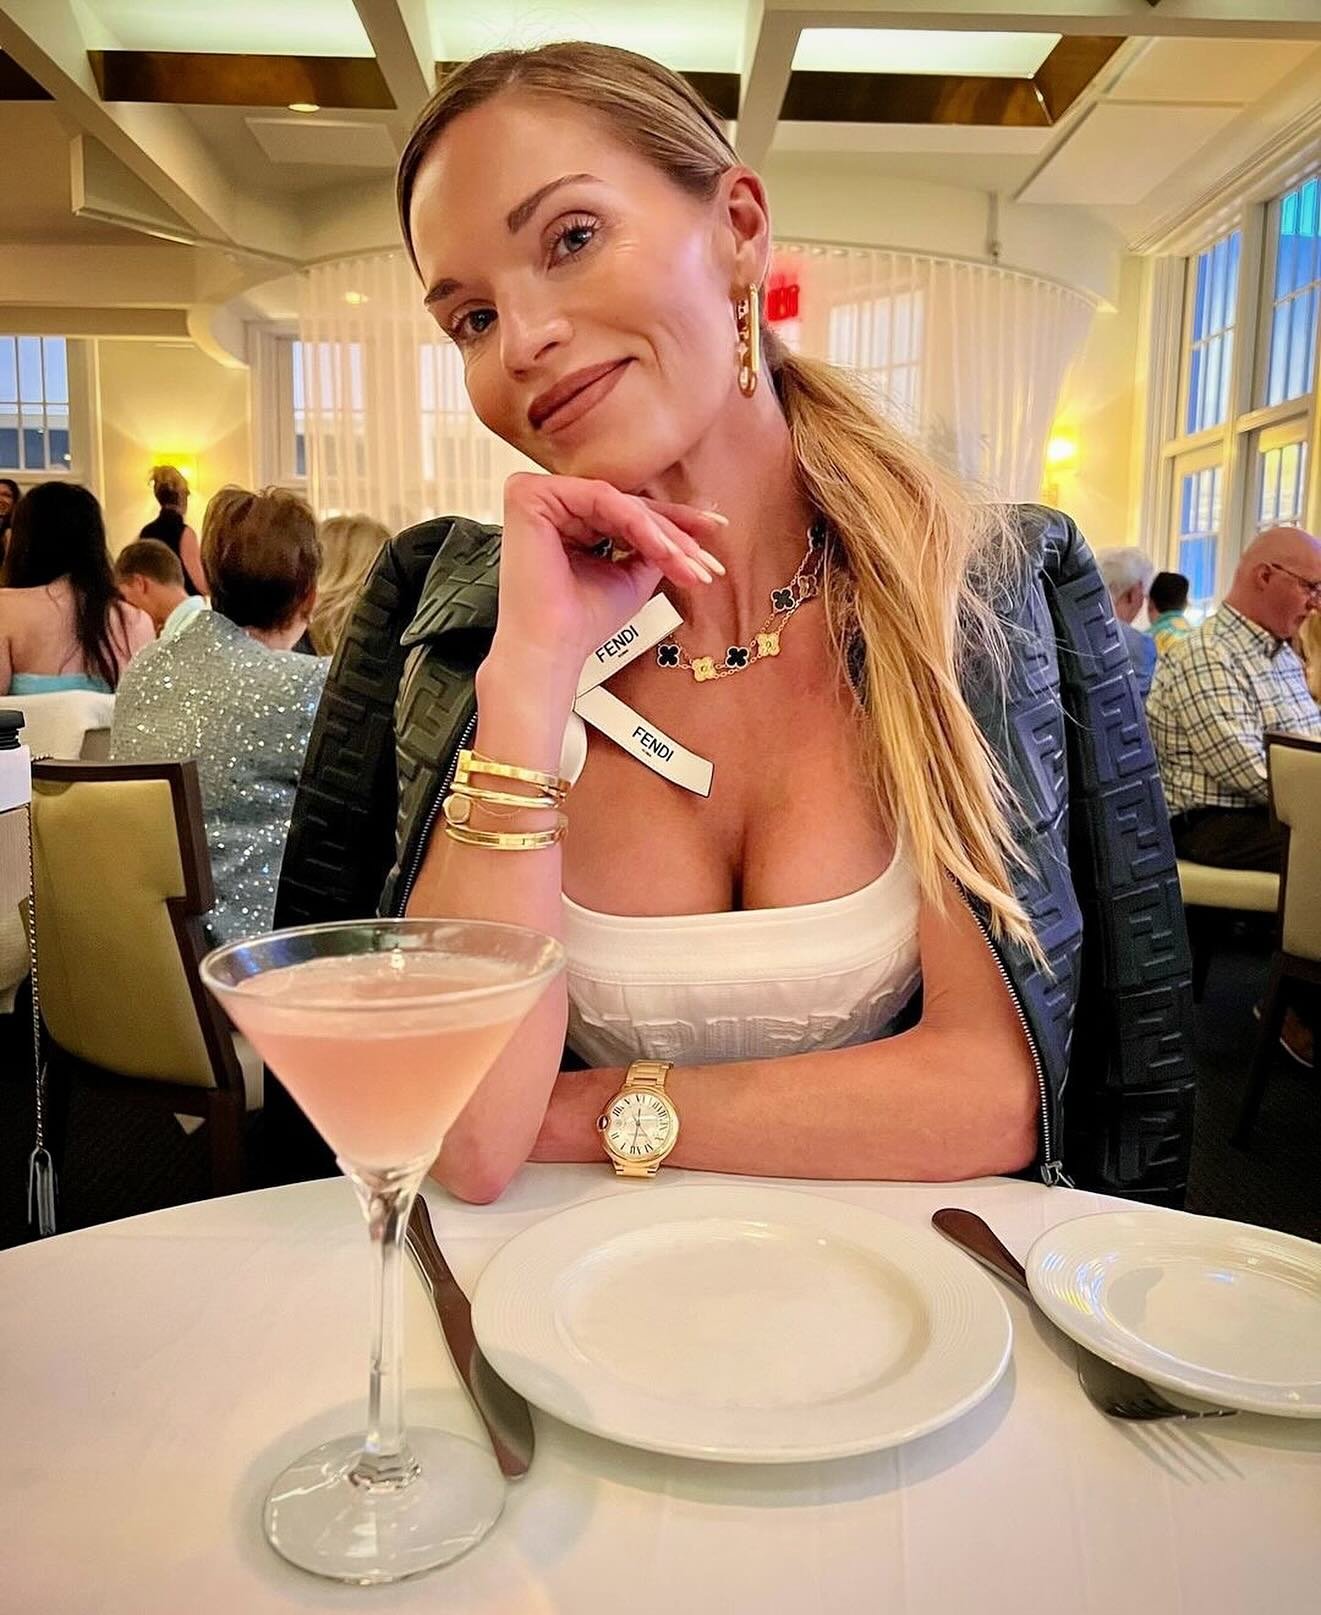 Brighten your Wednesday at BiCE Ristorante with the radiant Shannon @shannonboueri whose class and elegance light up any room! ✨🍸 #belladonna 

At BiCE Ristorante, there&rsquo;s never a dull moment, especially when accompanied by such stylish and gr